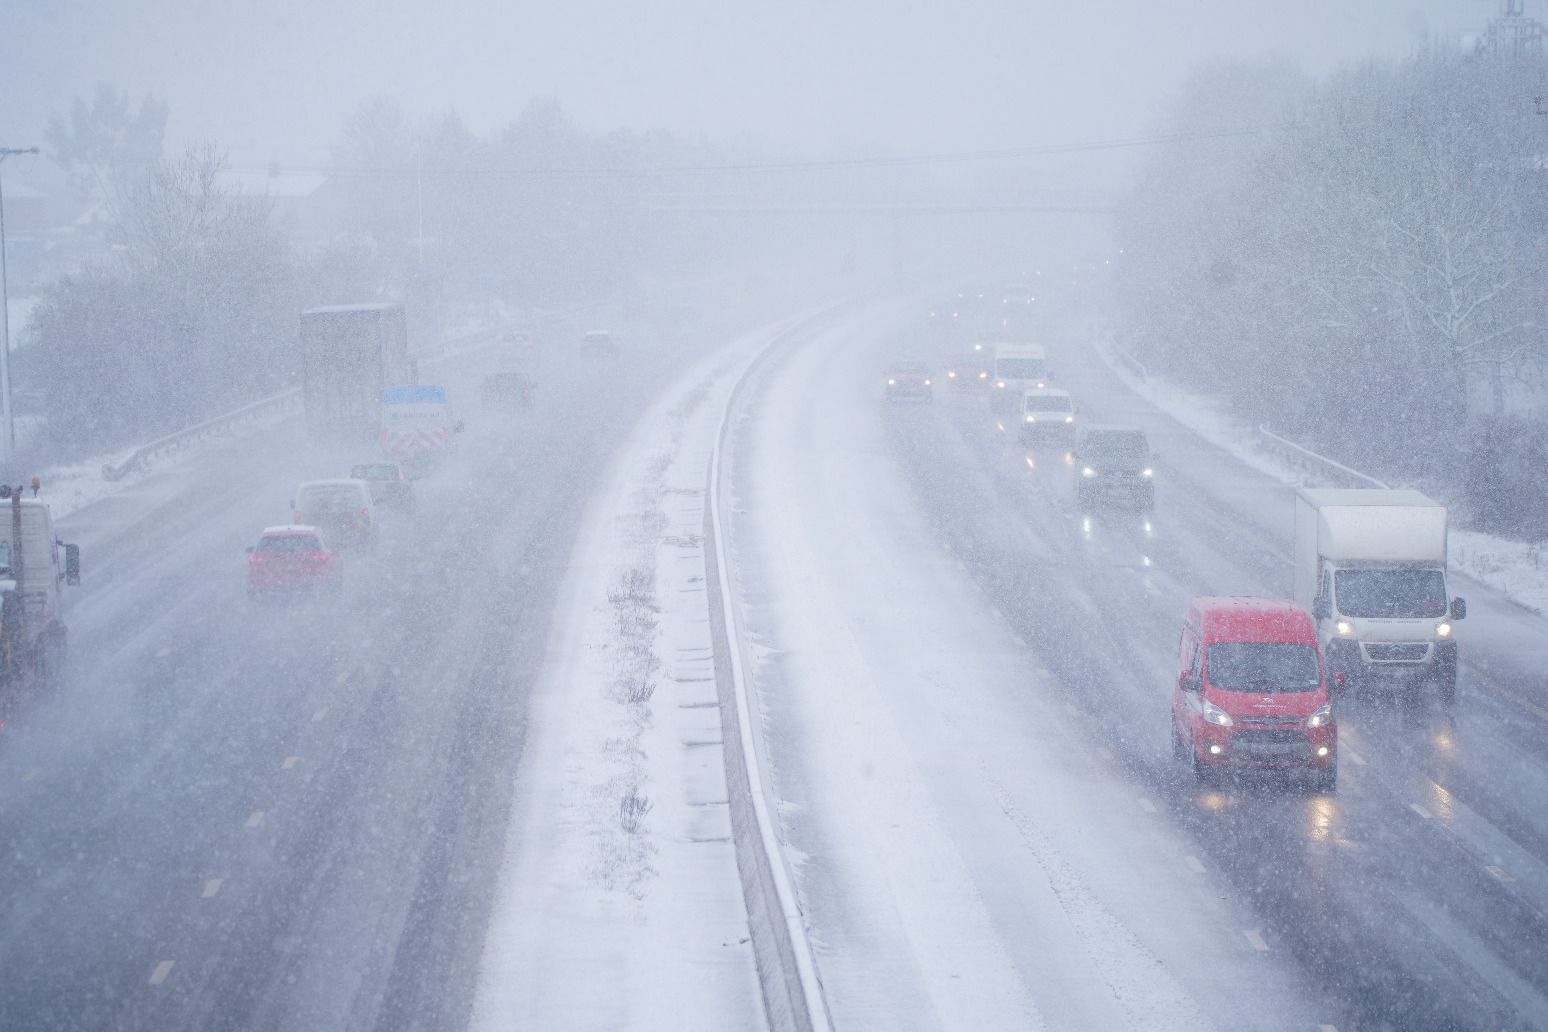 Amber warning for heavy snow and ‘blizzard conditions’ 